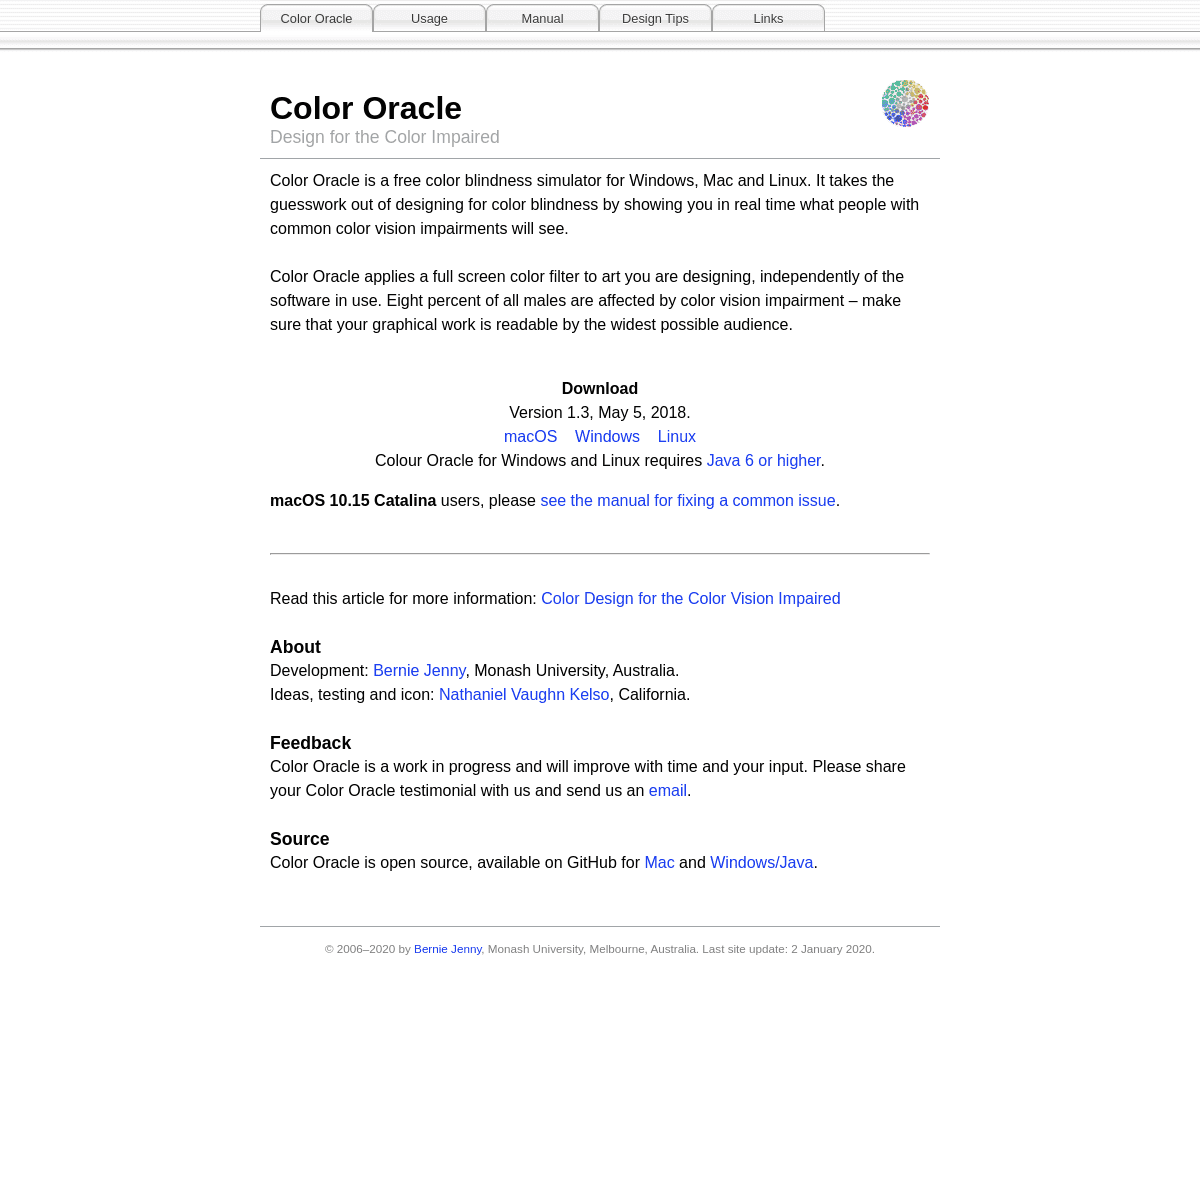 A complete backup of https://colororacle.org